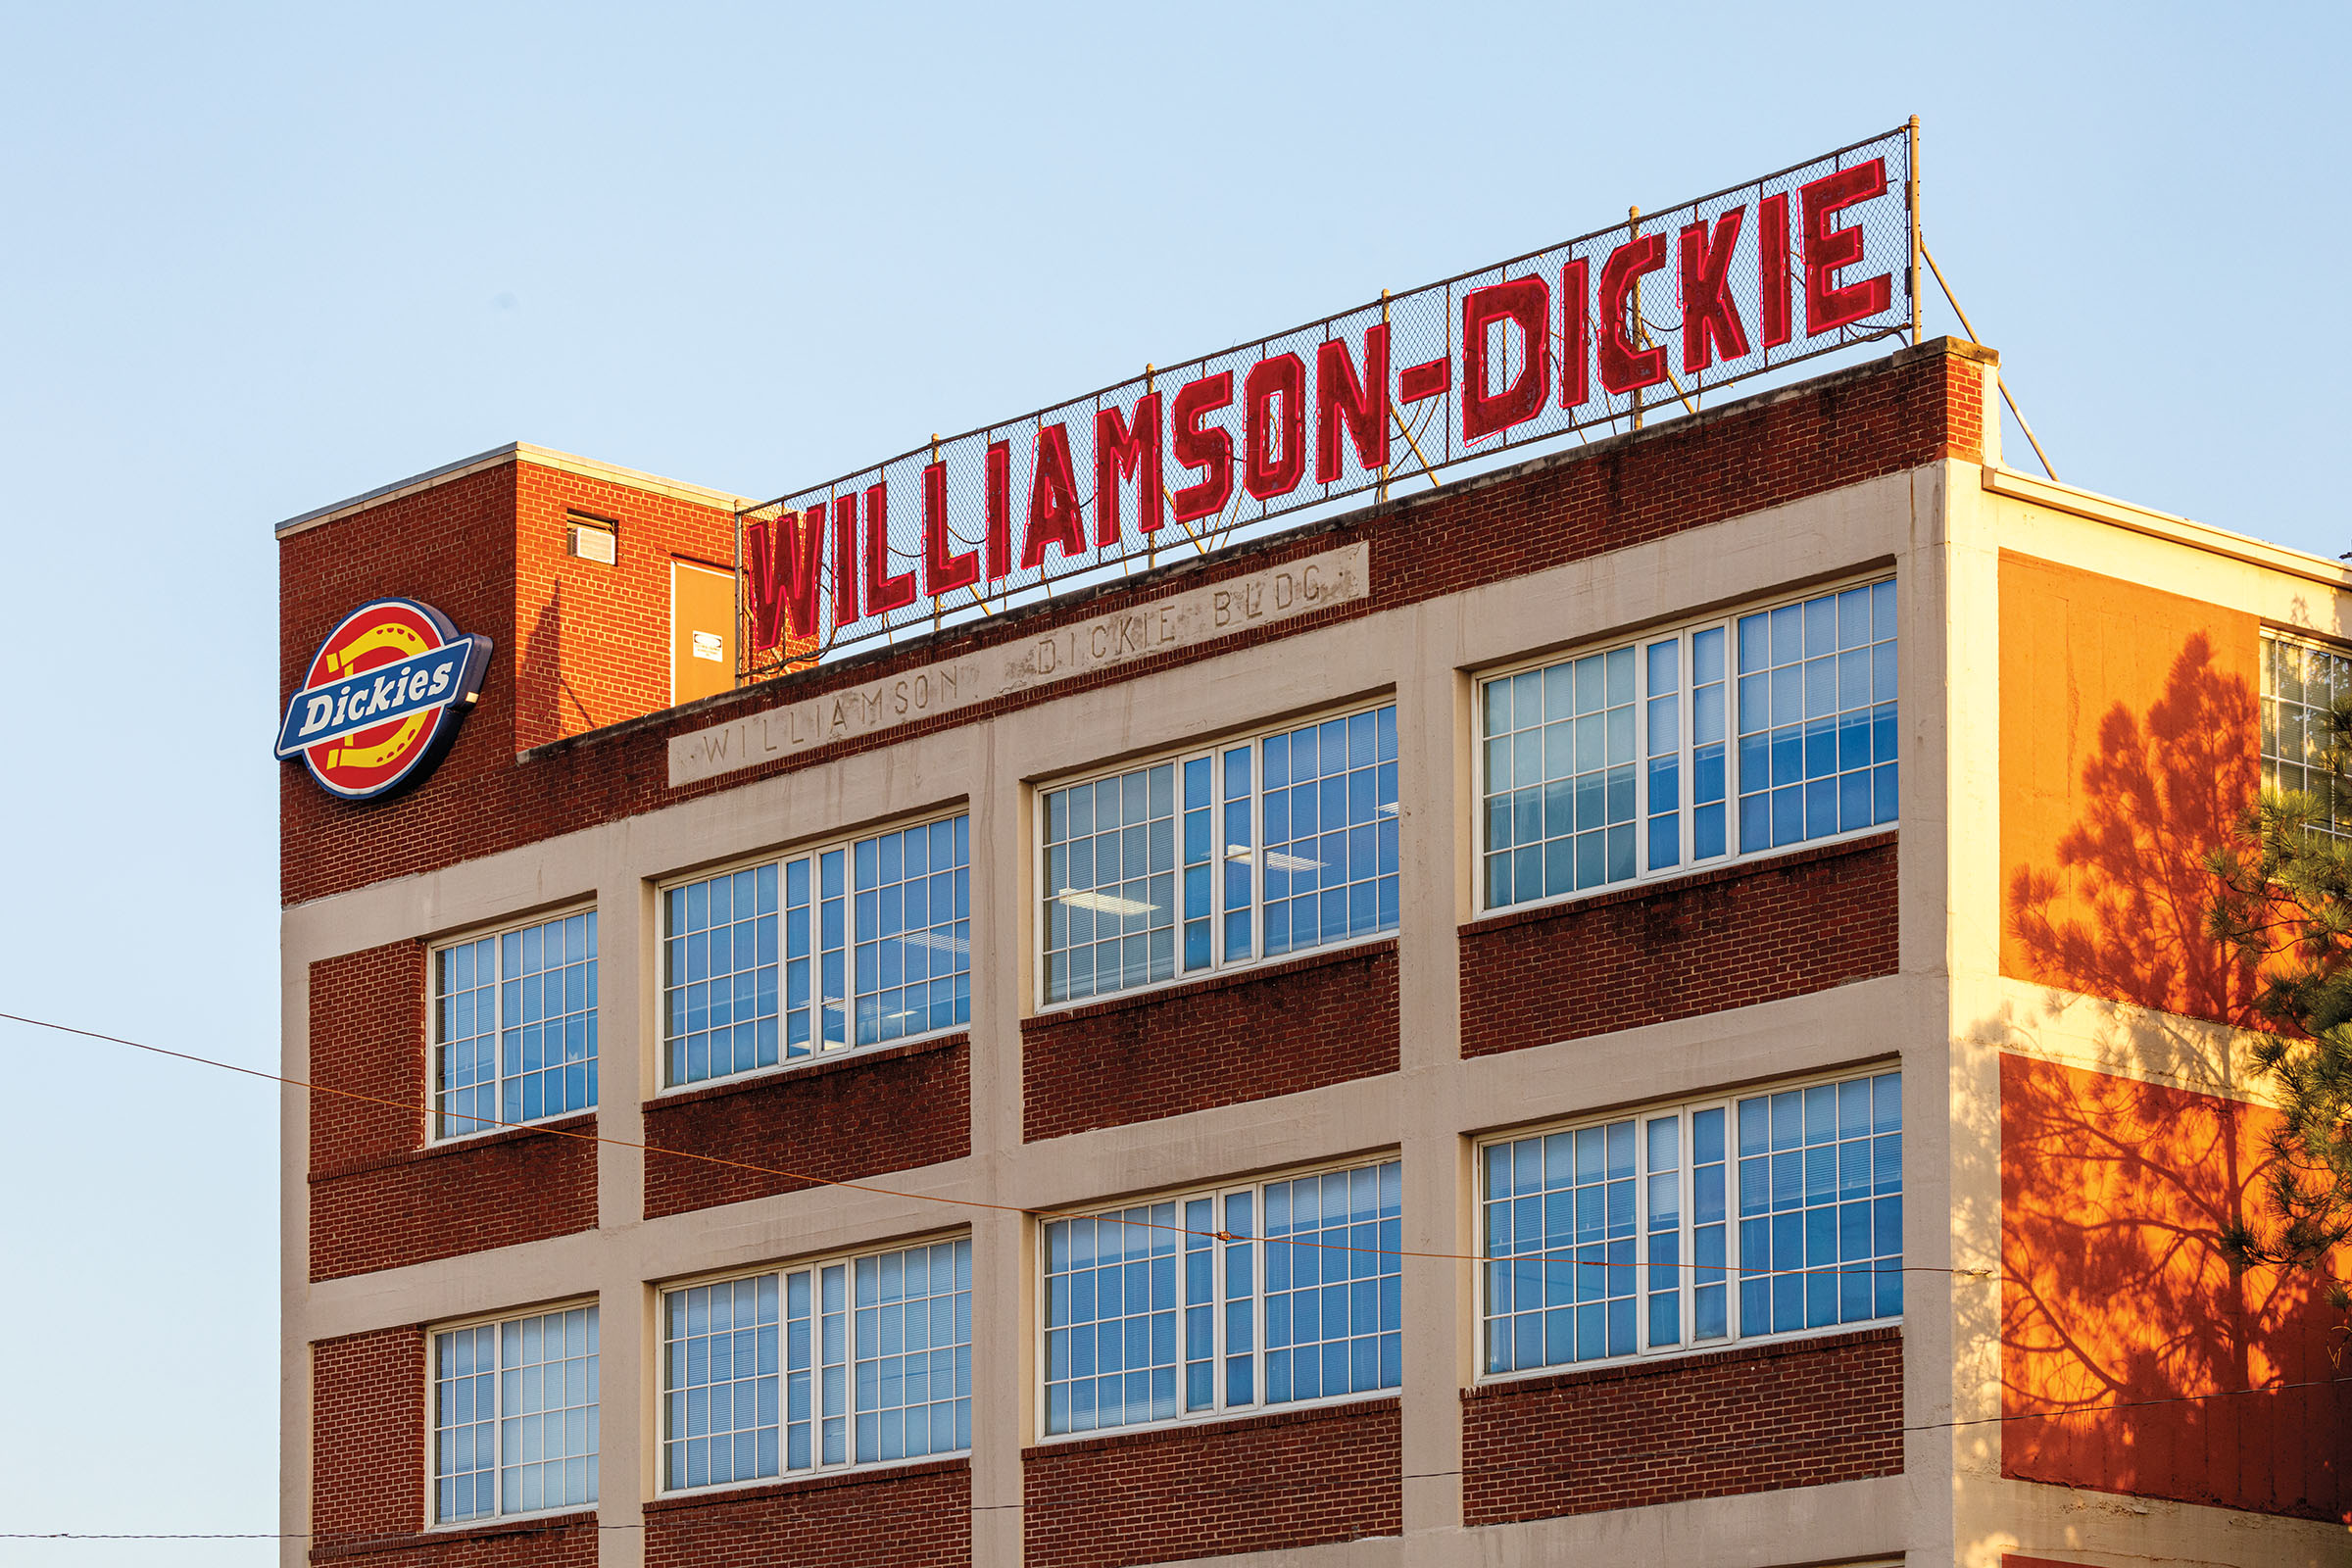 An outside view of a brick building in front of blue sky reading "Williamson-Dickie" on the outside